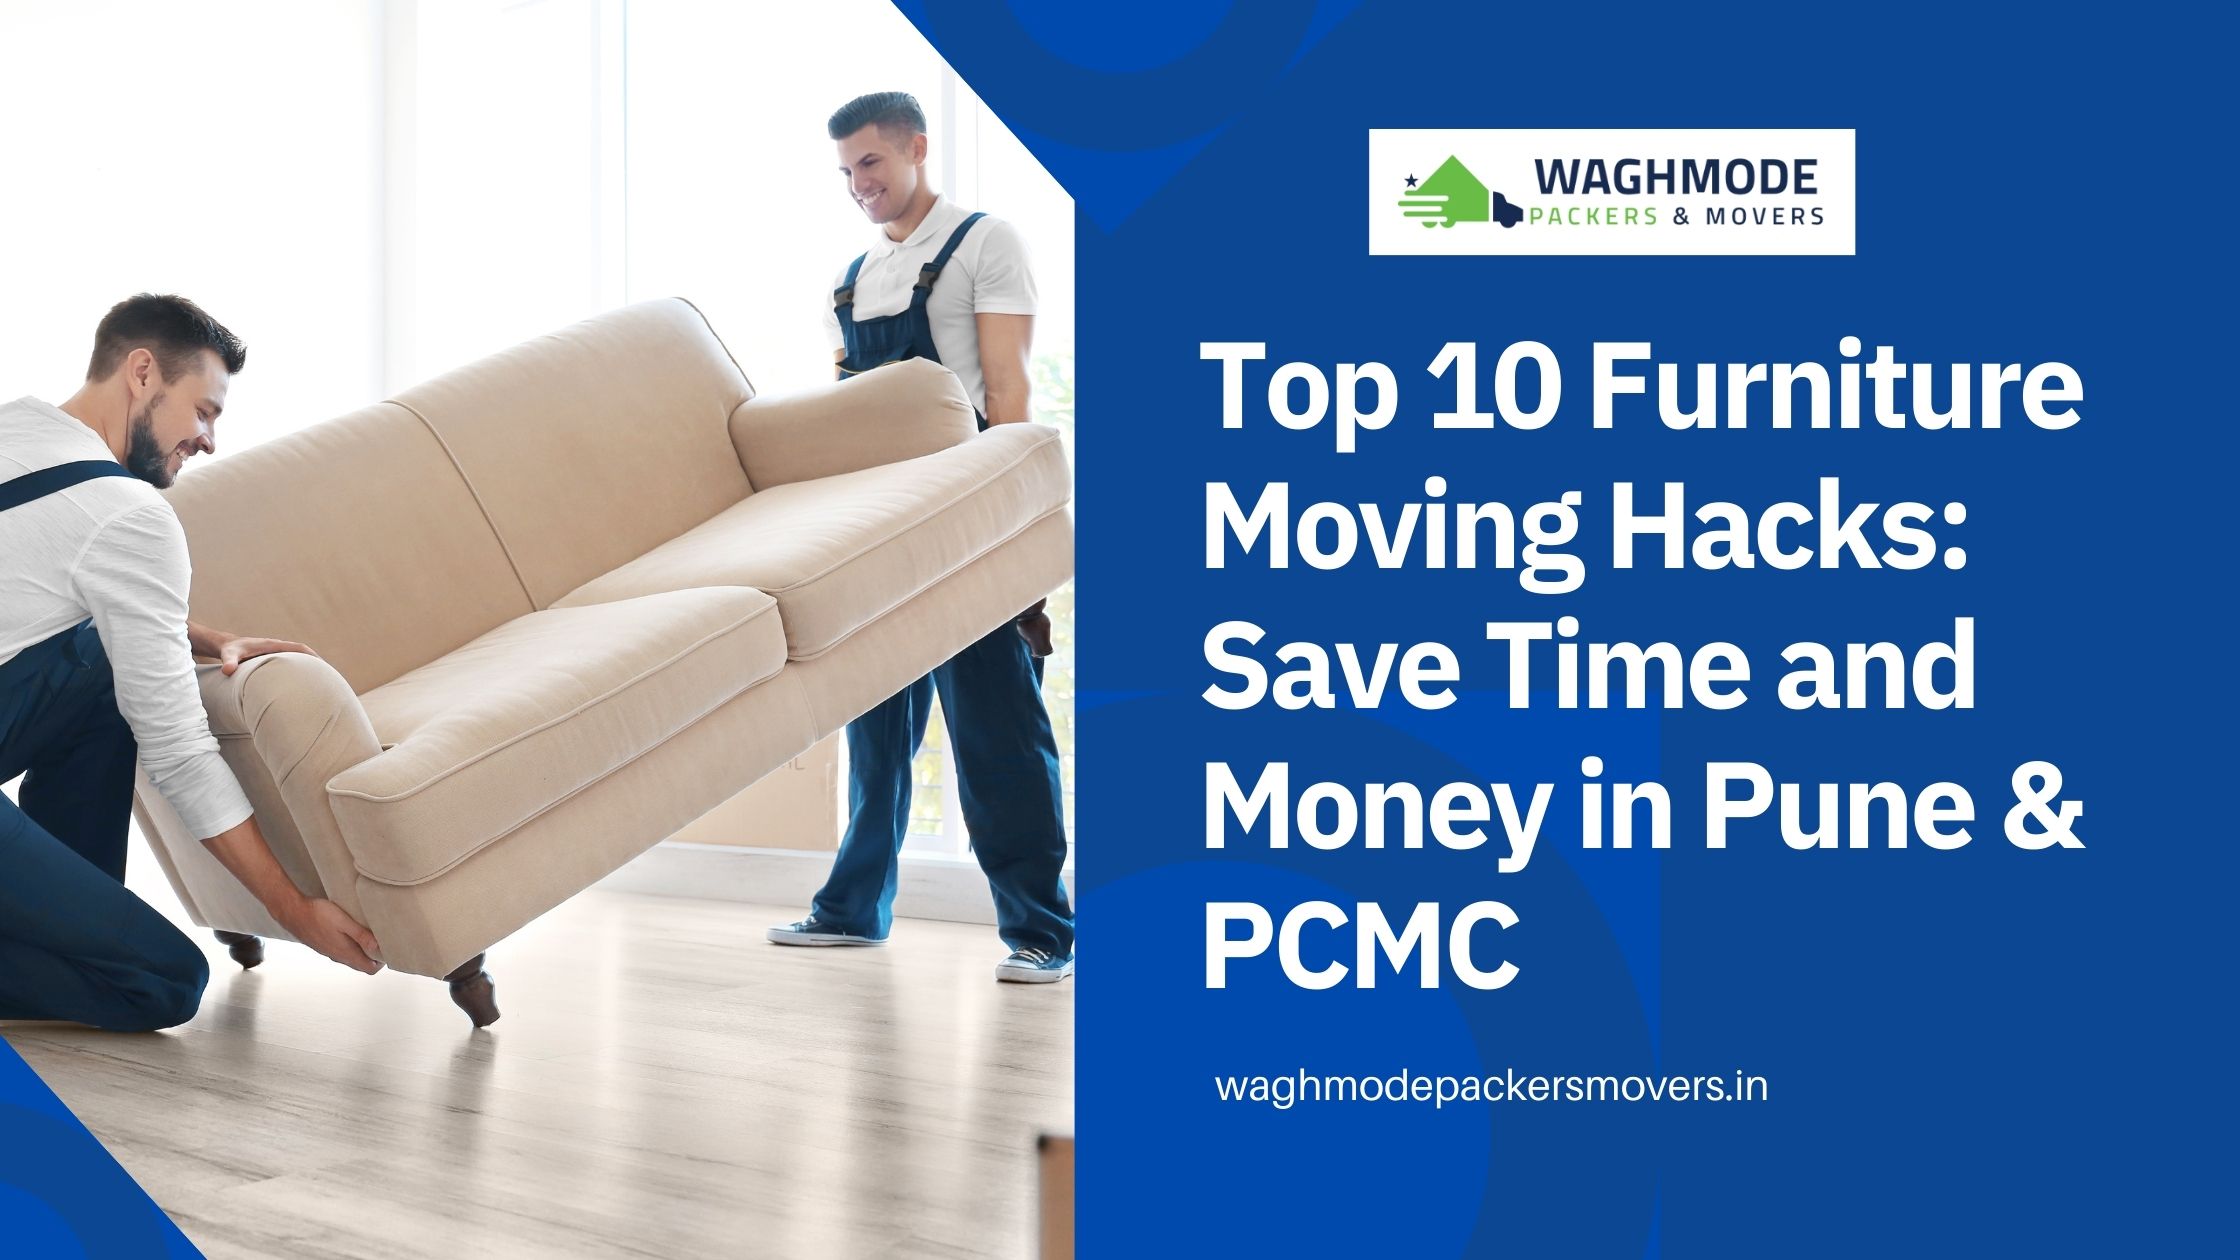 Top 10 Furniture Moving Hacks: Save Time and Money in Pune & PCMC